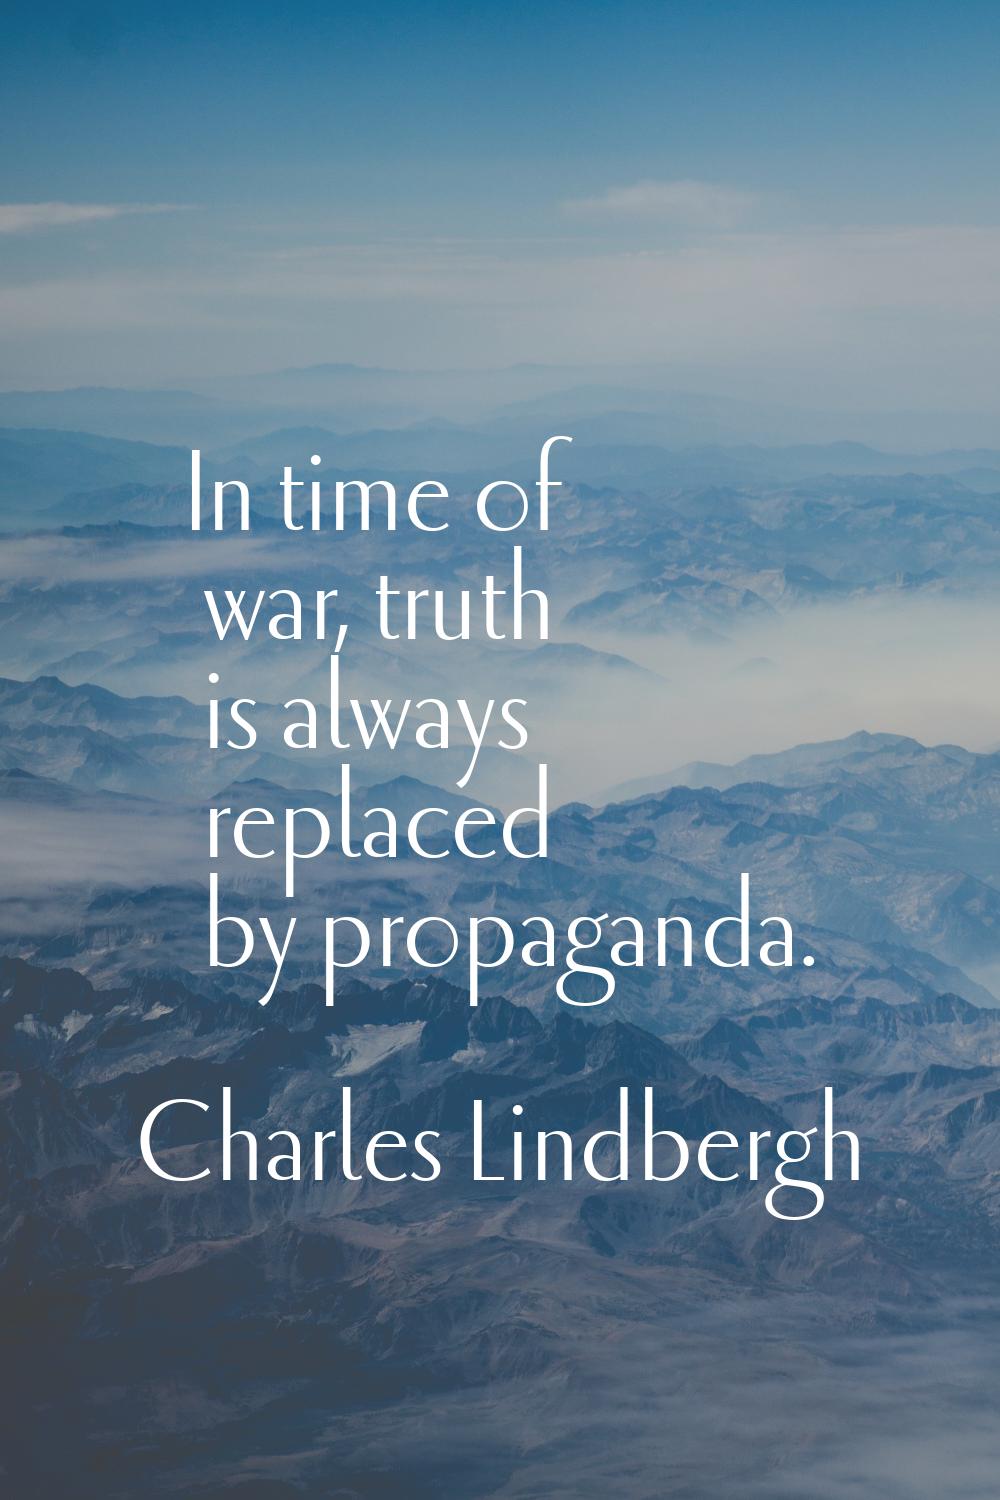 In time of war, truth is always replaced by propaganda.